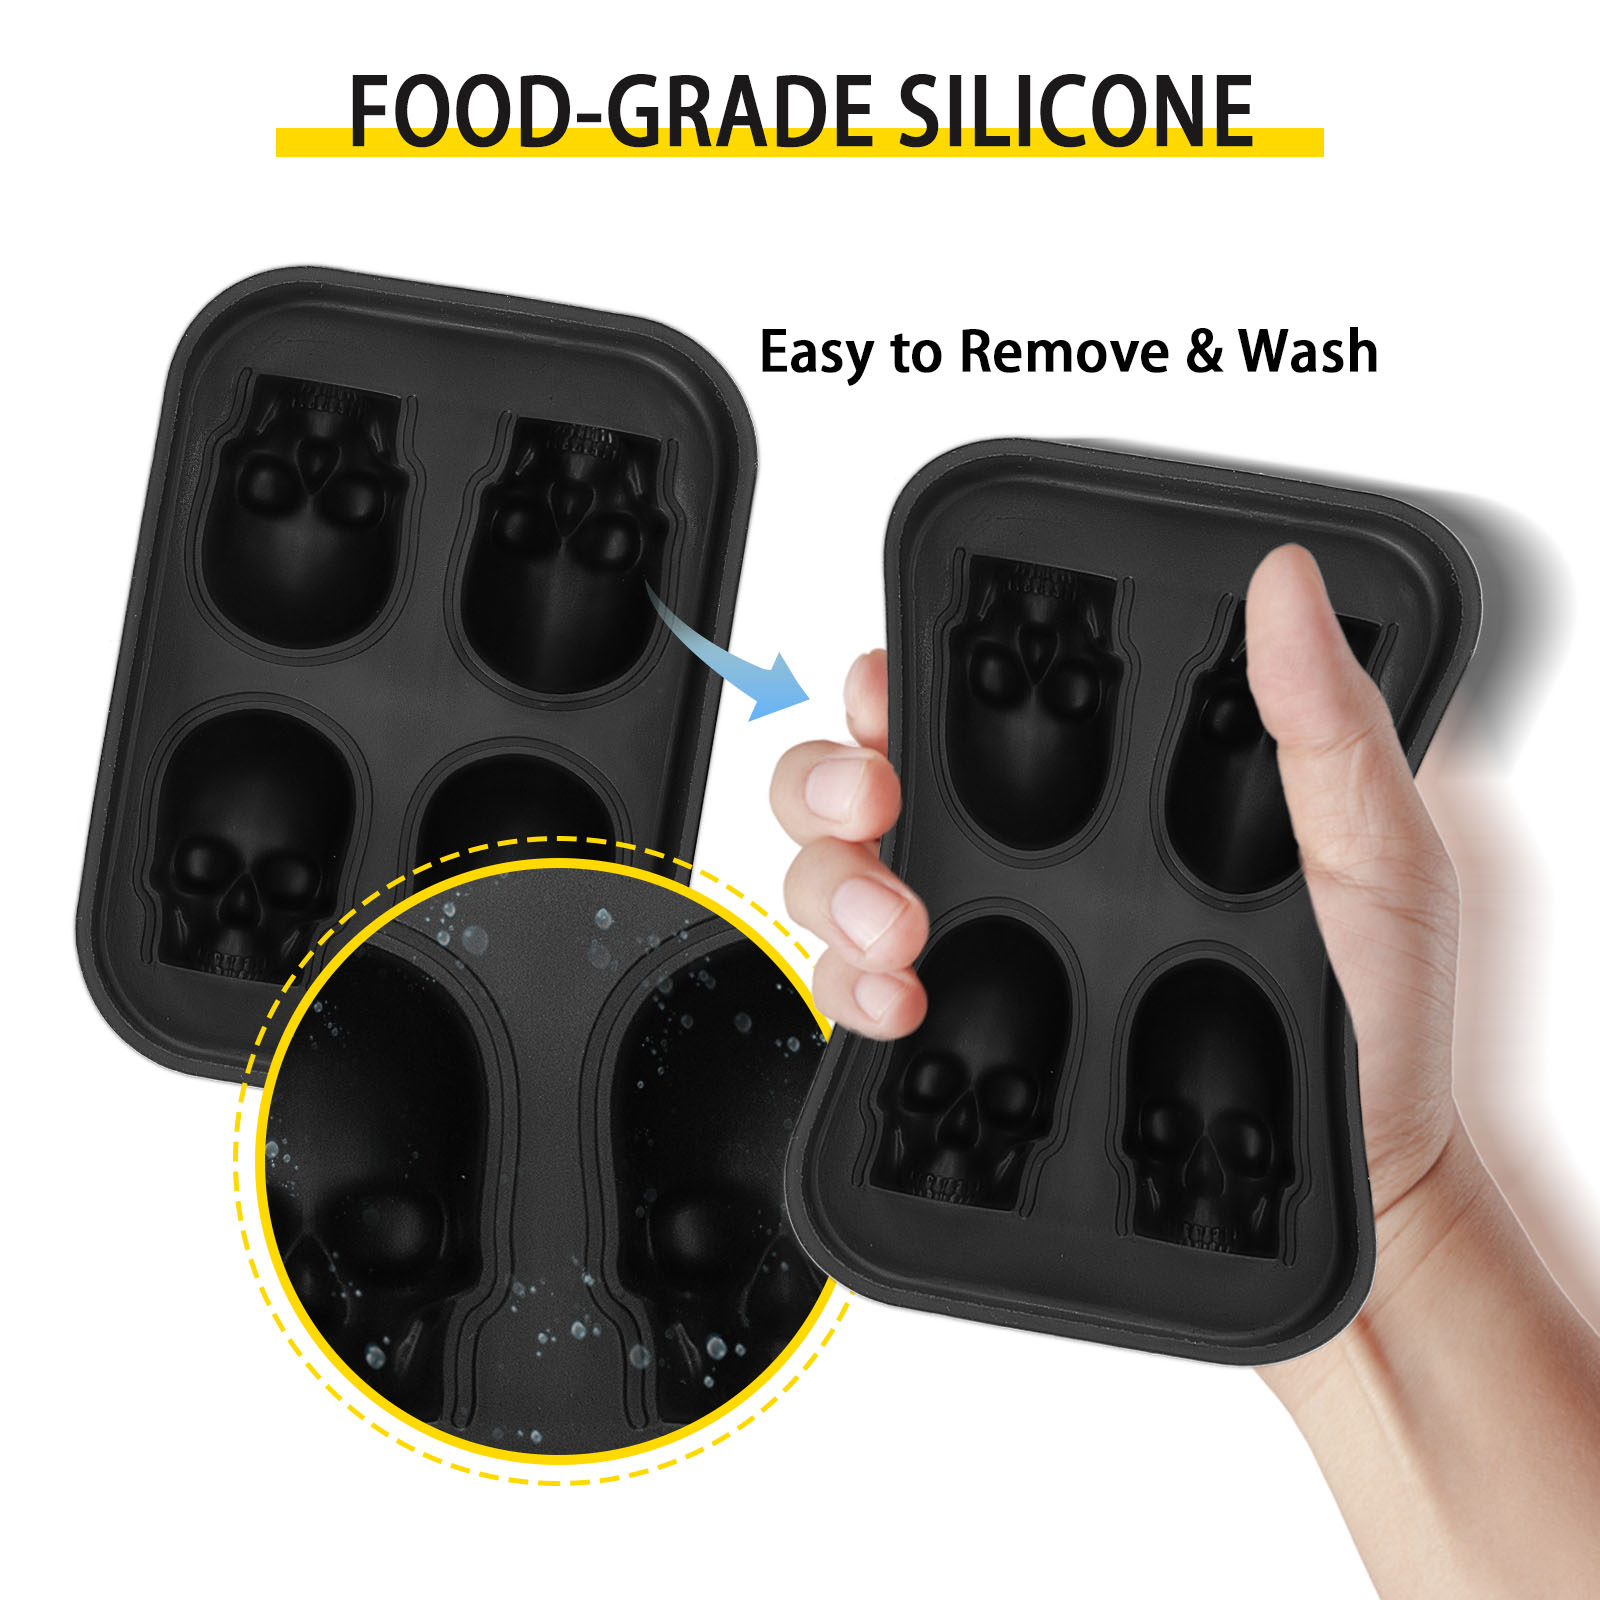 Plastic Molds Ice Tray 14 Grid 3D Round Ice Molds Home Bar Party Use Round Ball  Ice Cube Makers Kitchen DIY Ice Cream Moulds - Price history & Review